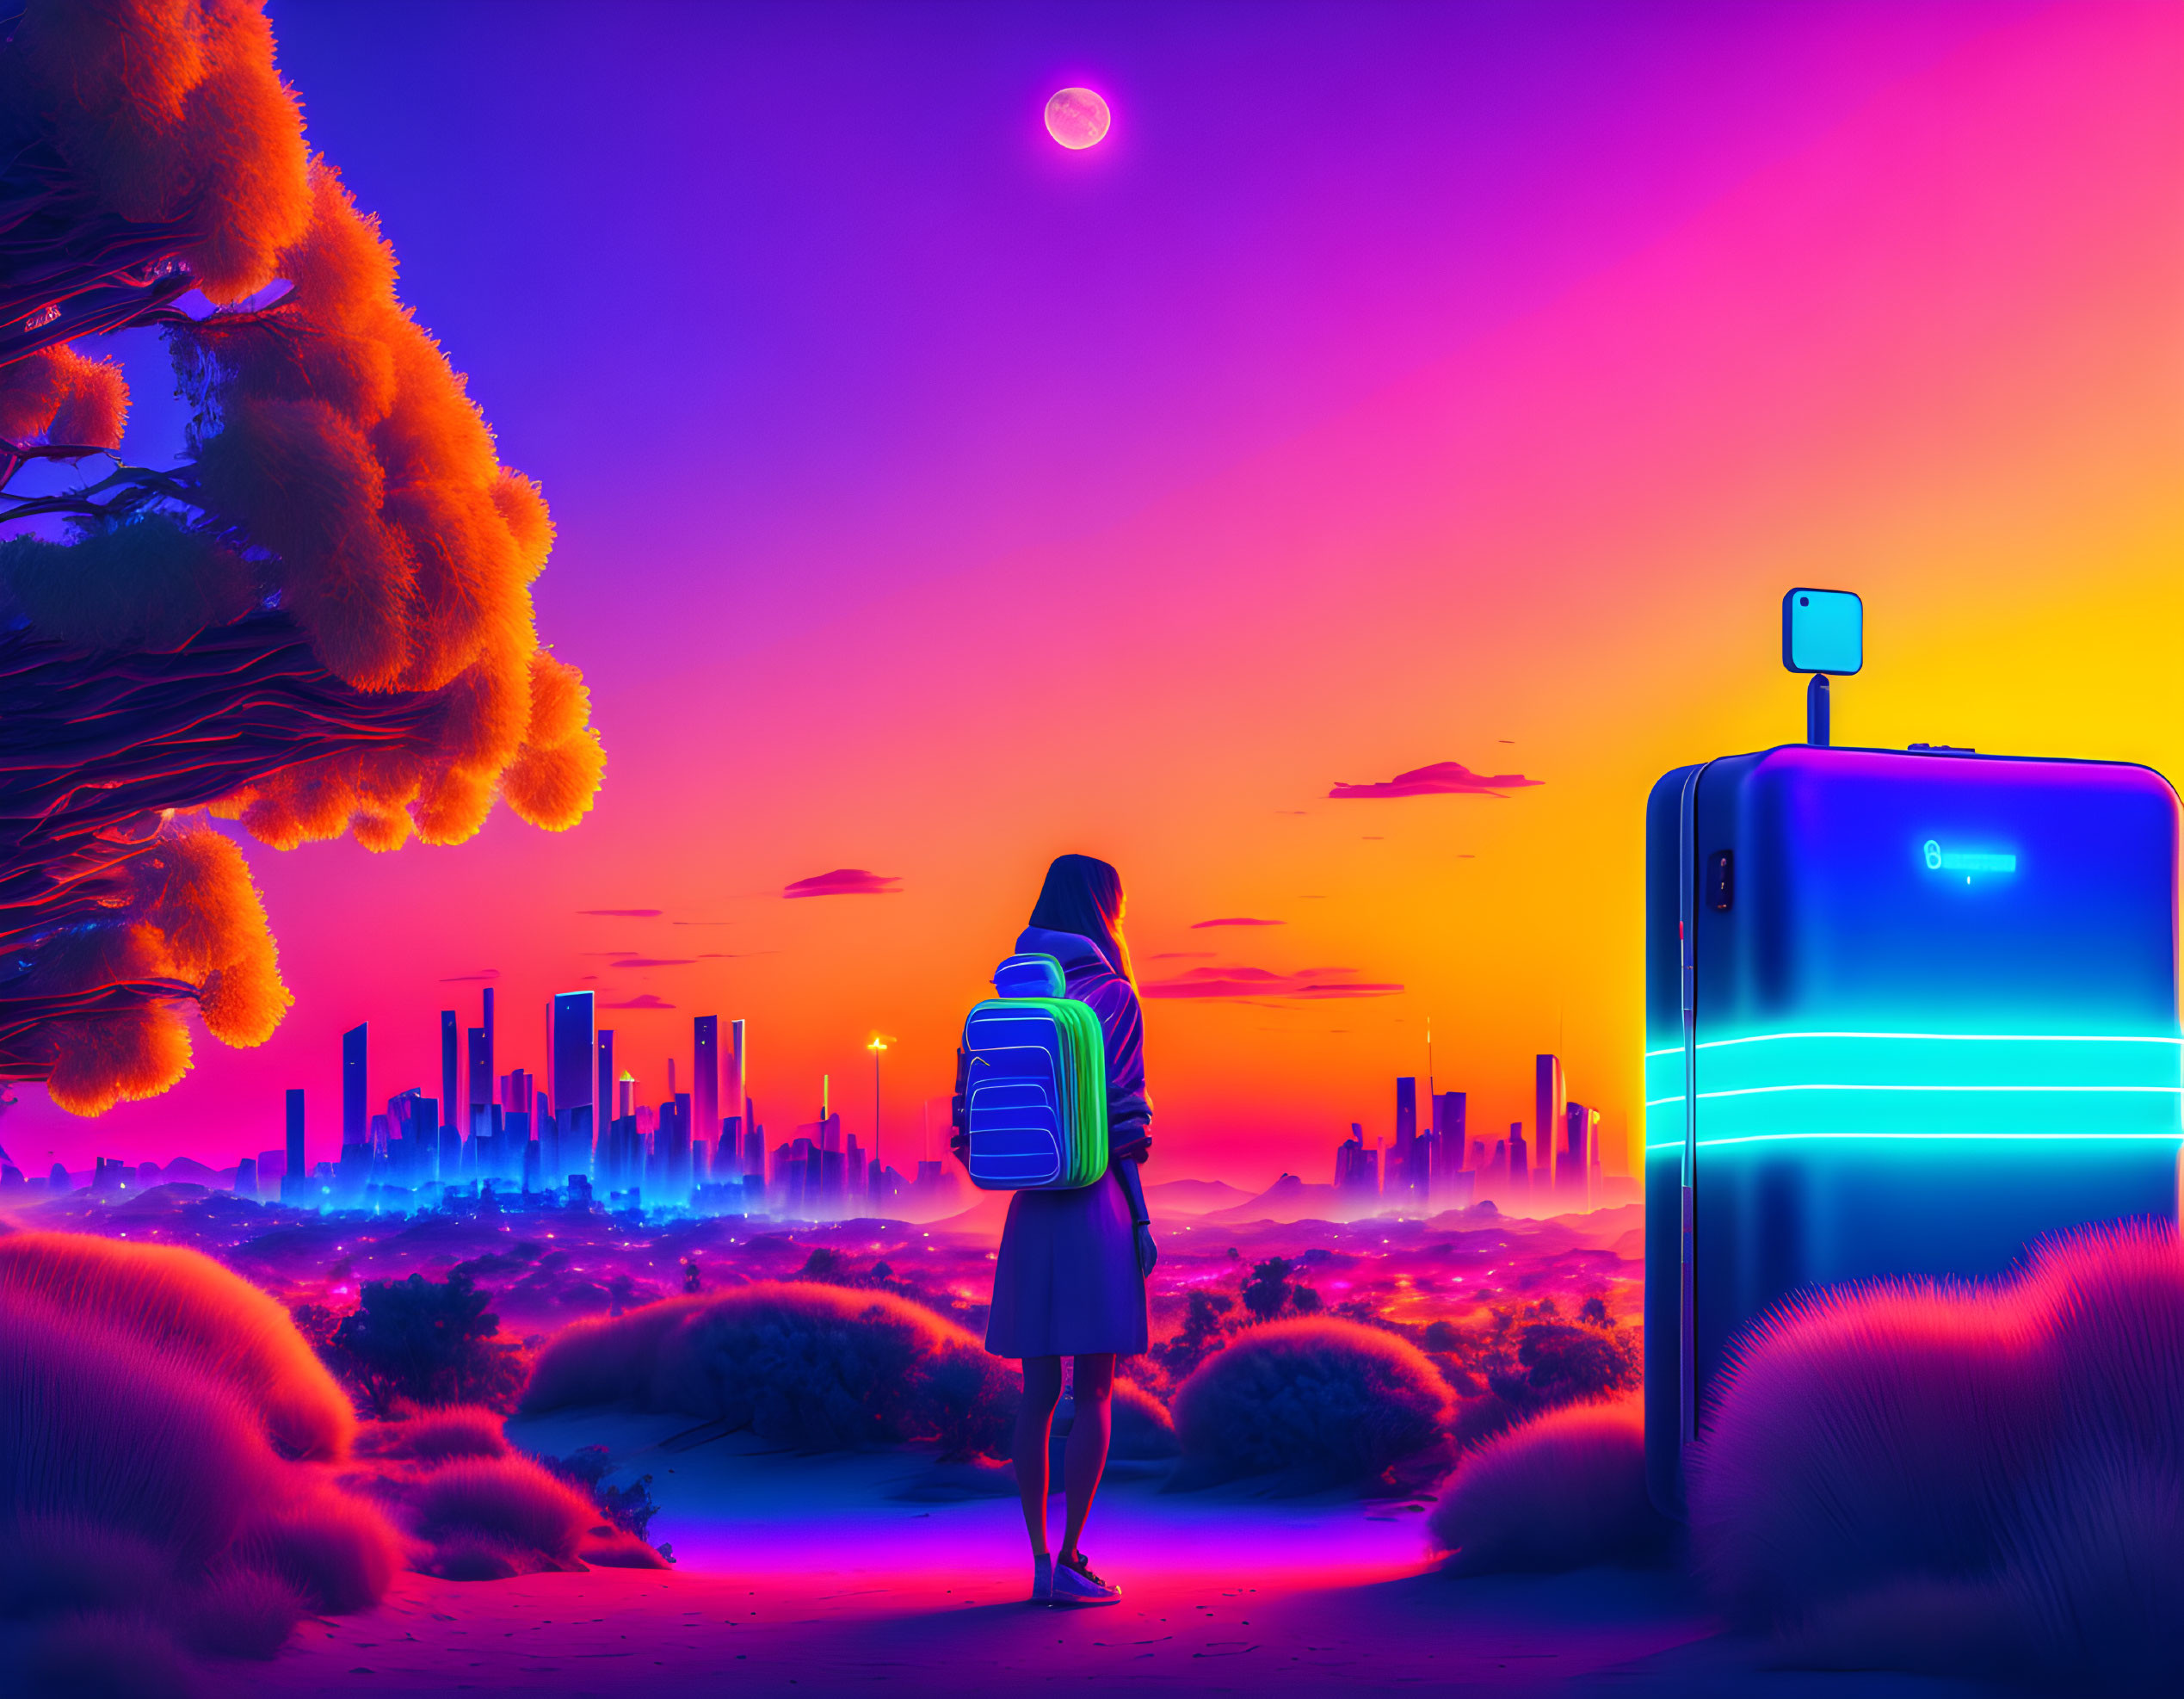 Futuristic cityscape at twilight with person and glowing suitcase